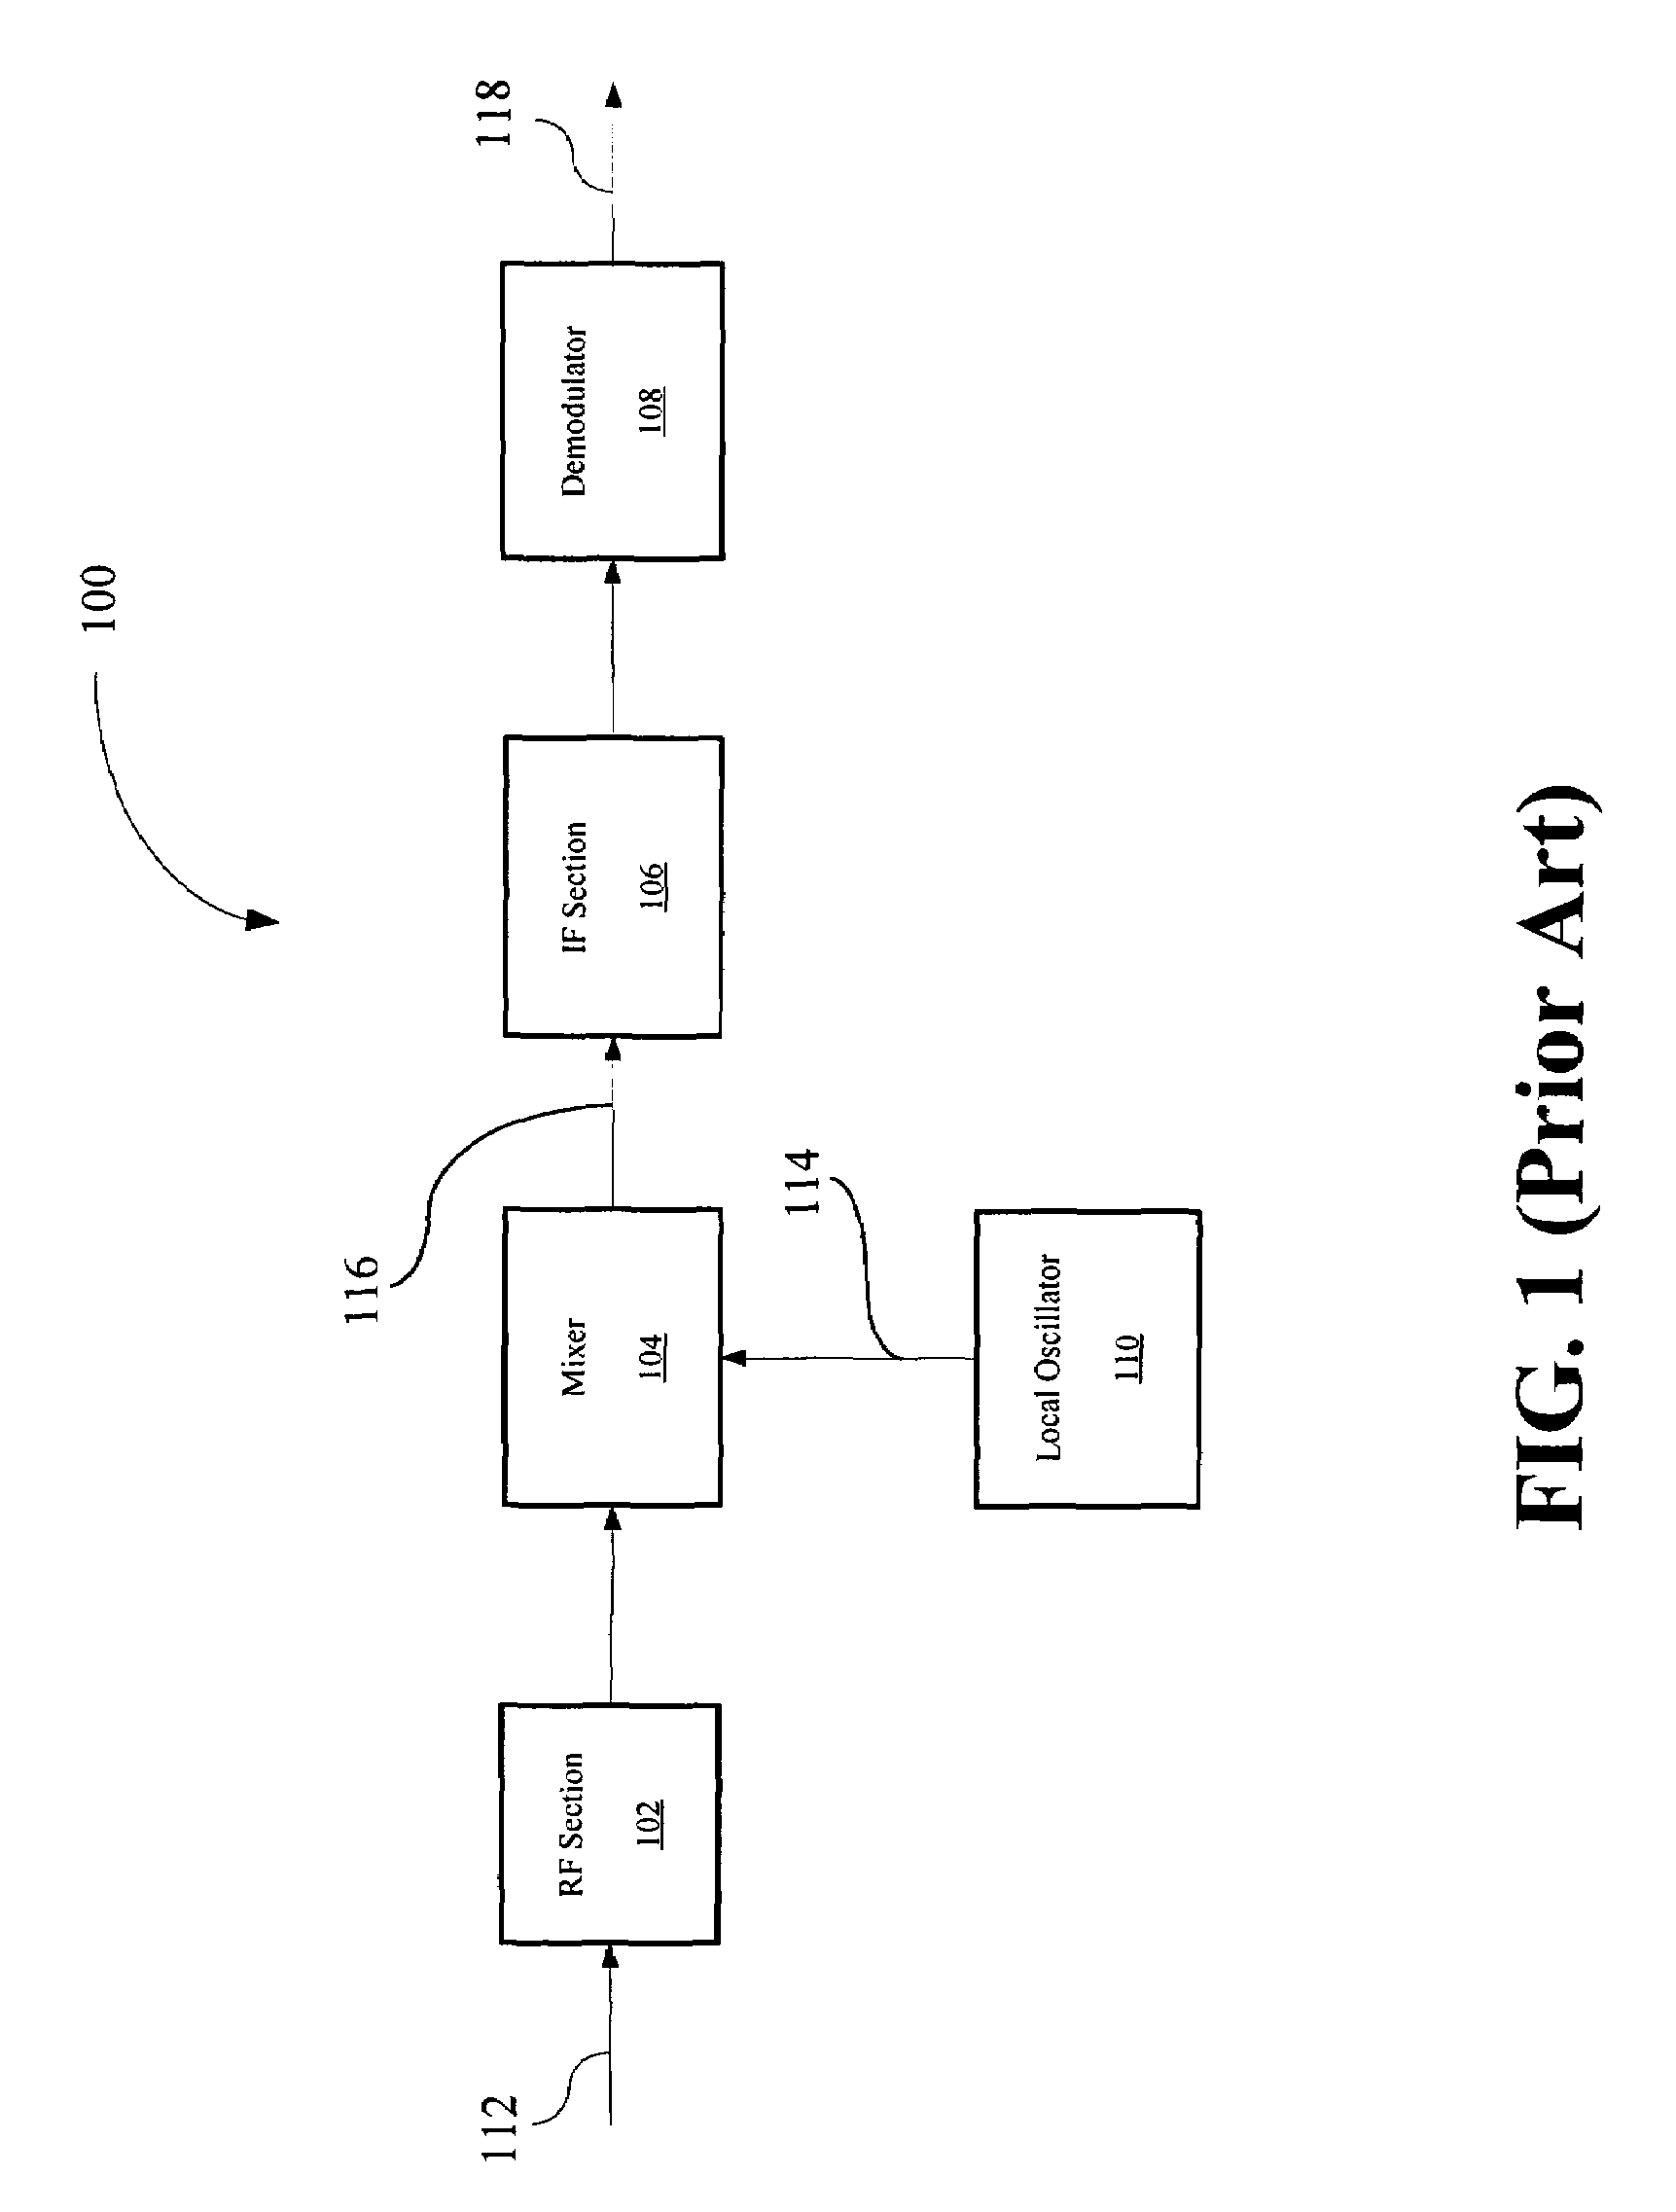 DC offset correction for direct-conversion receiver